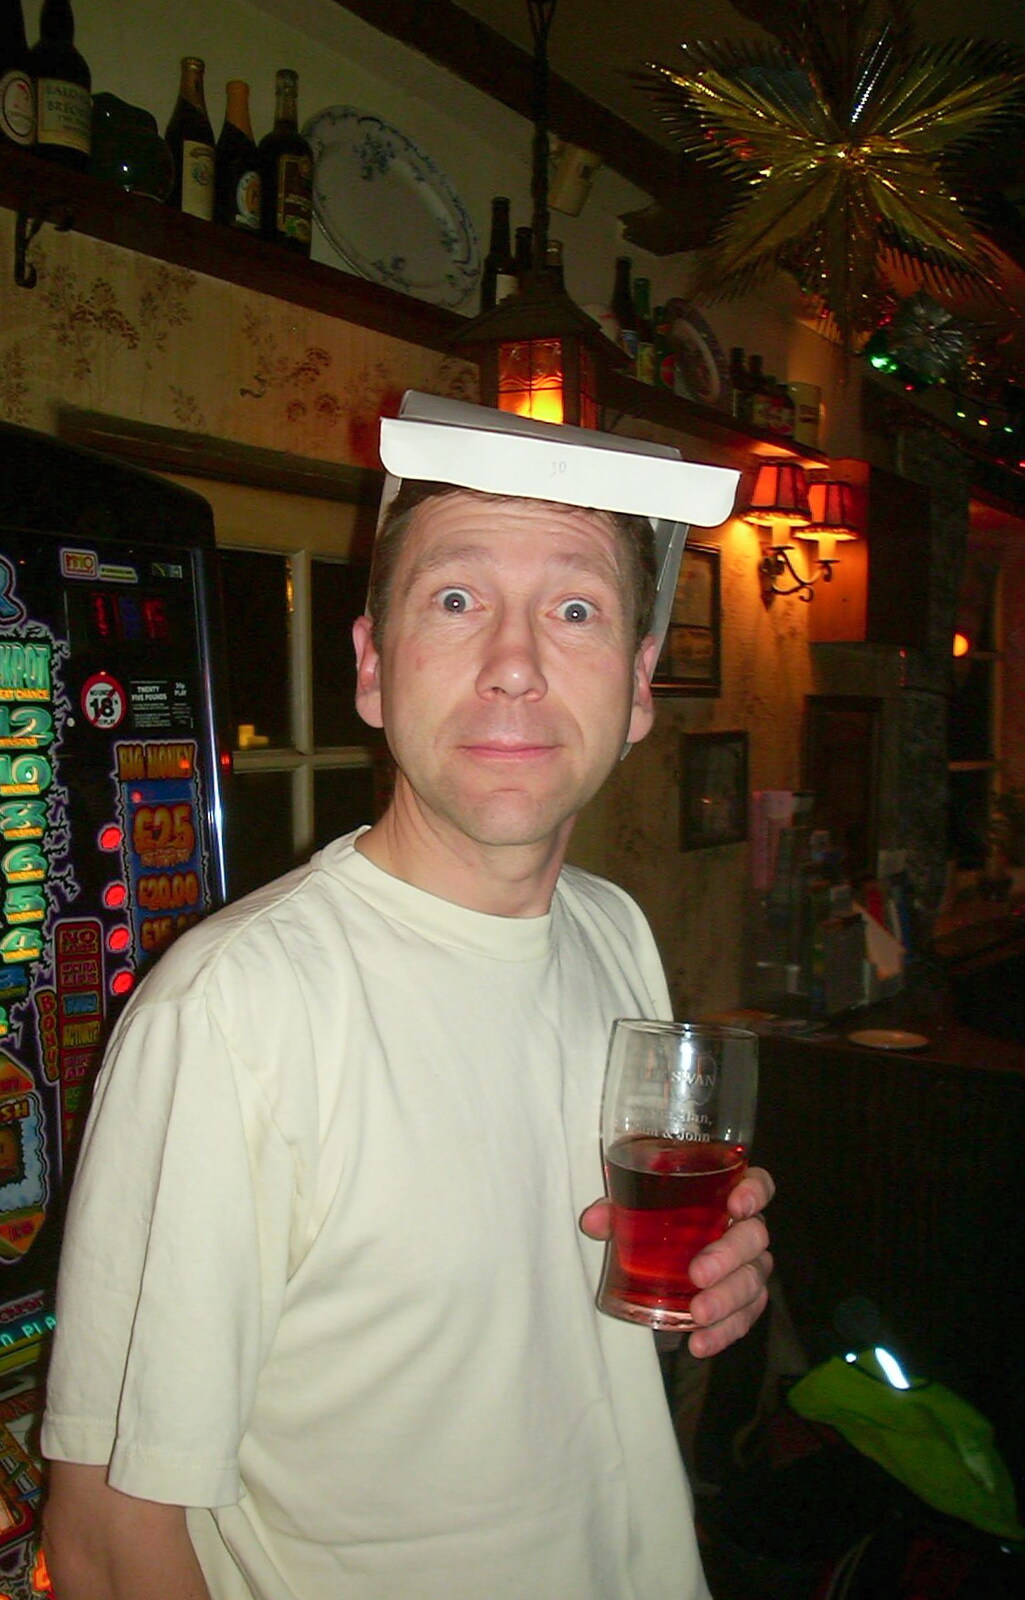 New Year's Eve at the Swan Inn, Brome, Suffolk - 31st December 2002: Apple's got a box on his head